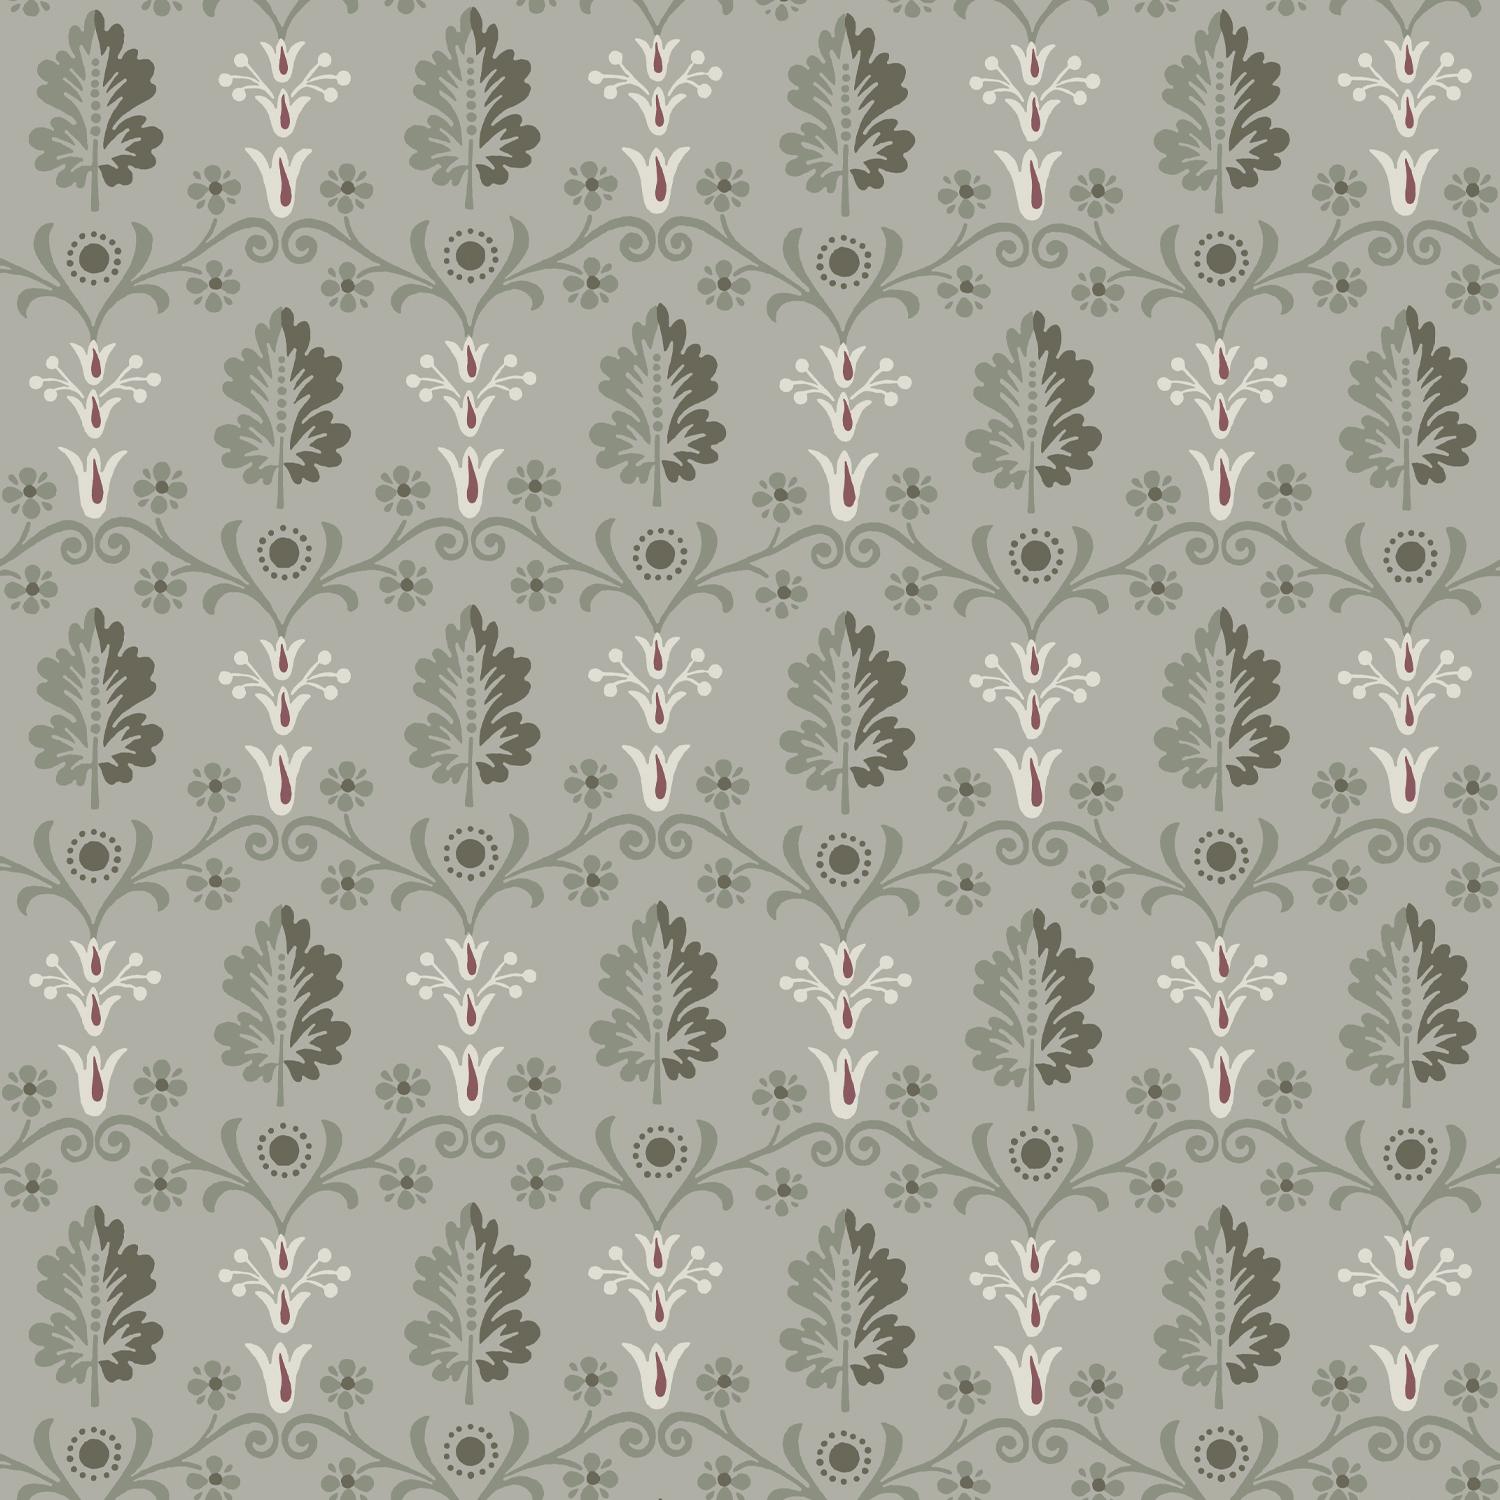 French 'Fin d'Hiver‘ wallpaper by Papier Français, collection BNF N°1 For Sale